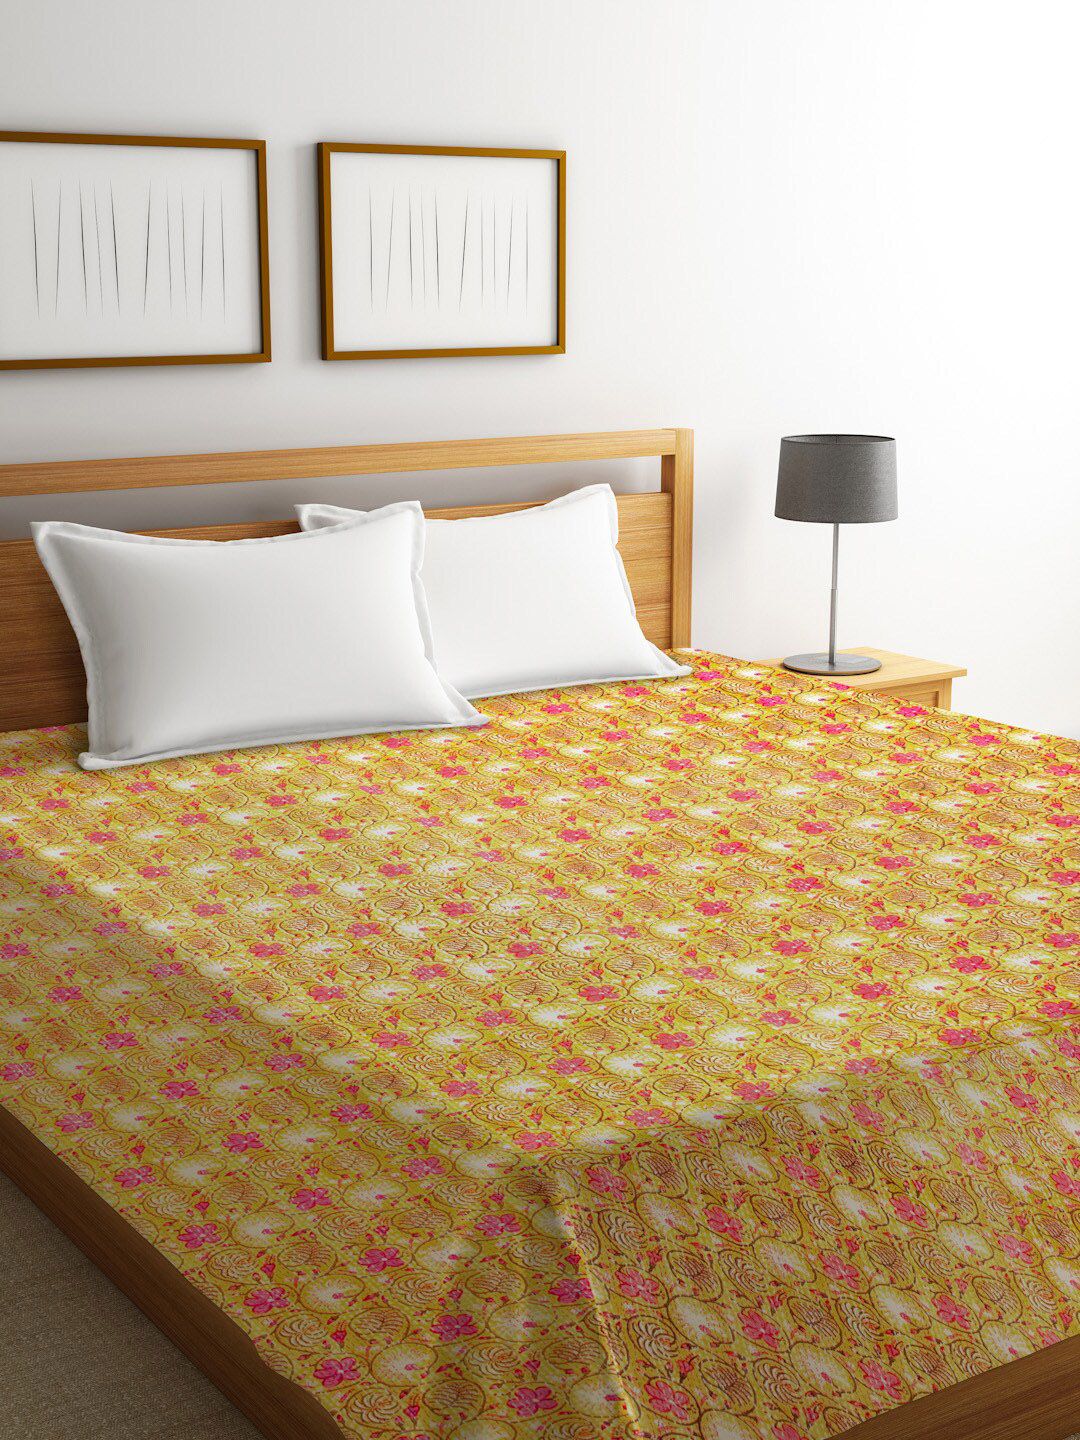 Rajasthan Decor Yellow & Pink  Jaipuri Kantha Floral Printed Sustainable Cotton Bed Cover Price in India